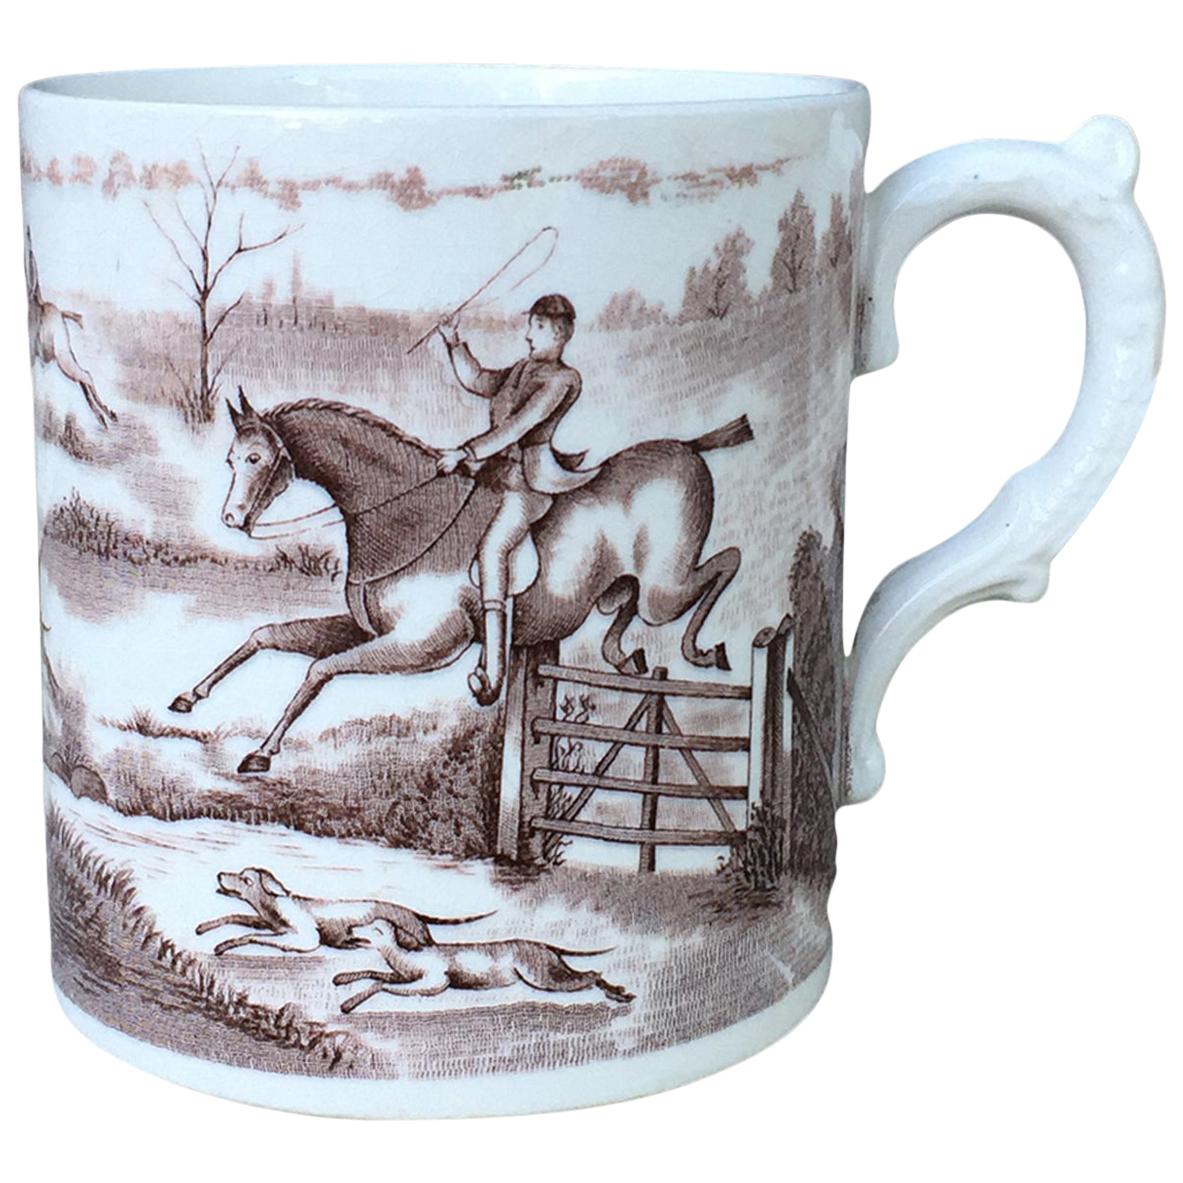 American Transferware Porcelain Mug with Horse/Equestrian by Anchor Pottery For Sale